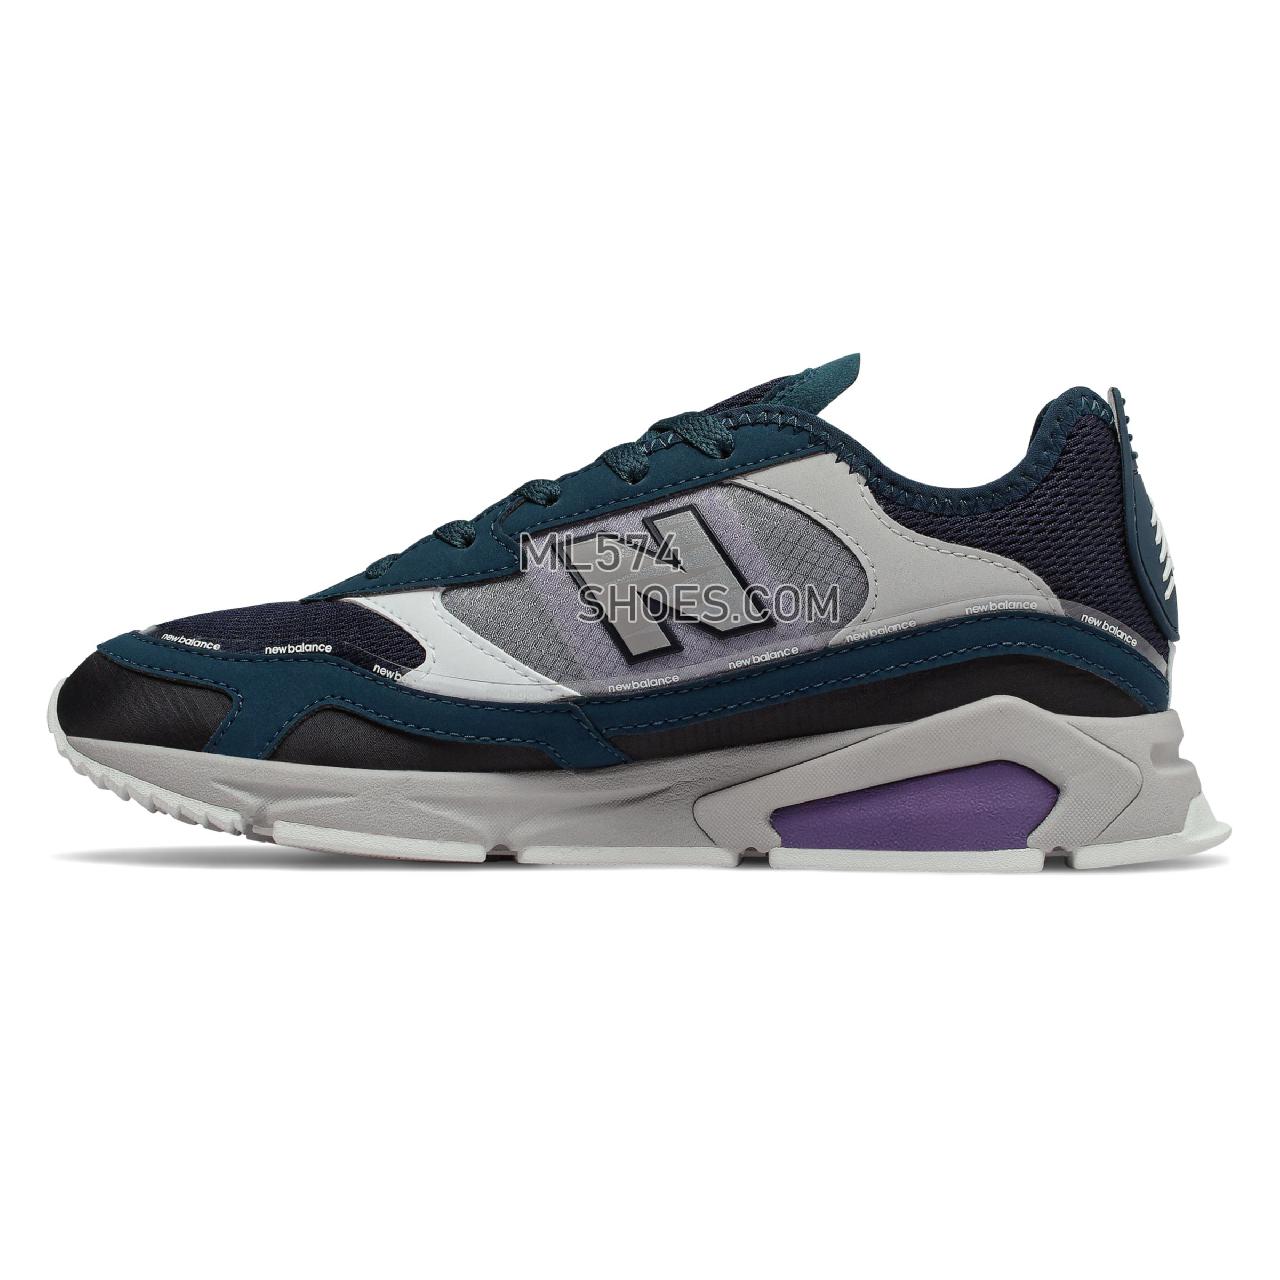 New Balance X-Racer - Women's Sport Style Sneakers - Supercell with Black and Violet Fluorite - WSXRCHFC